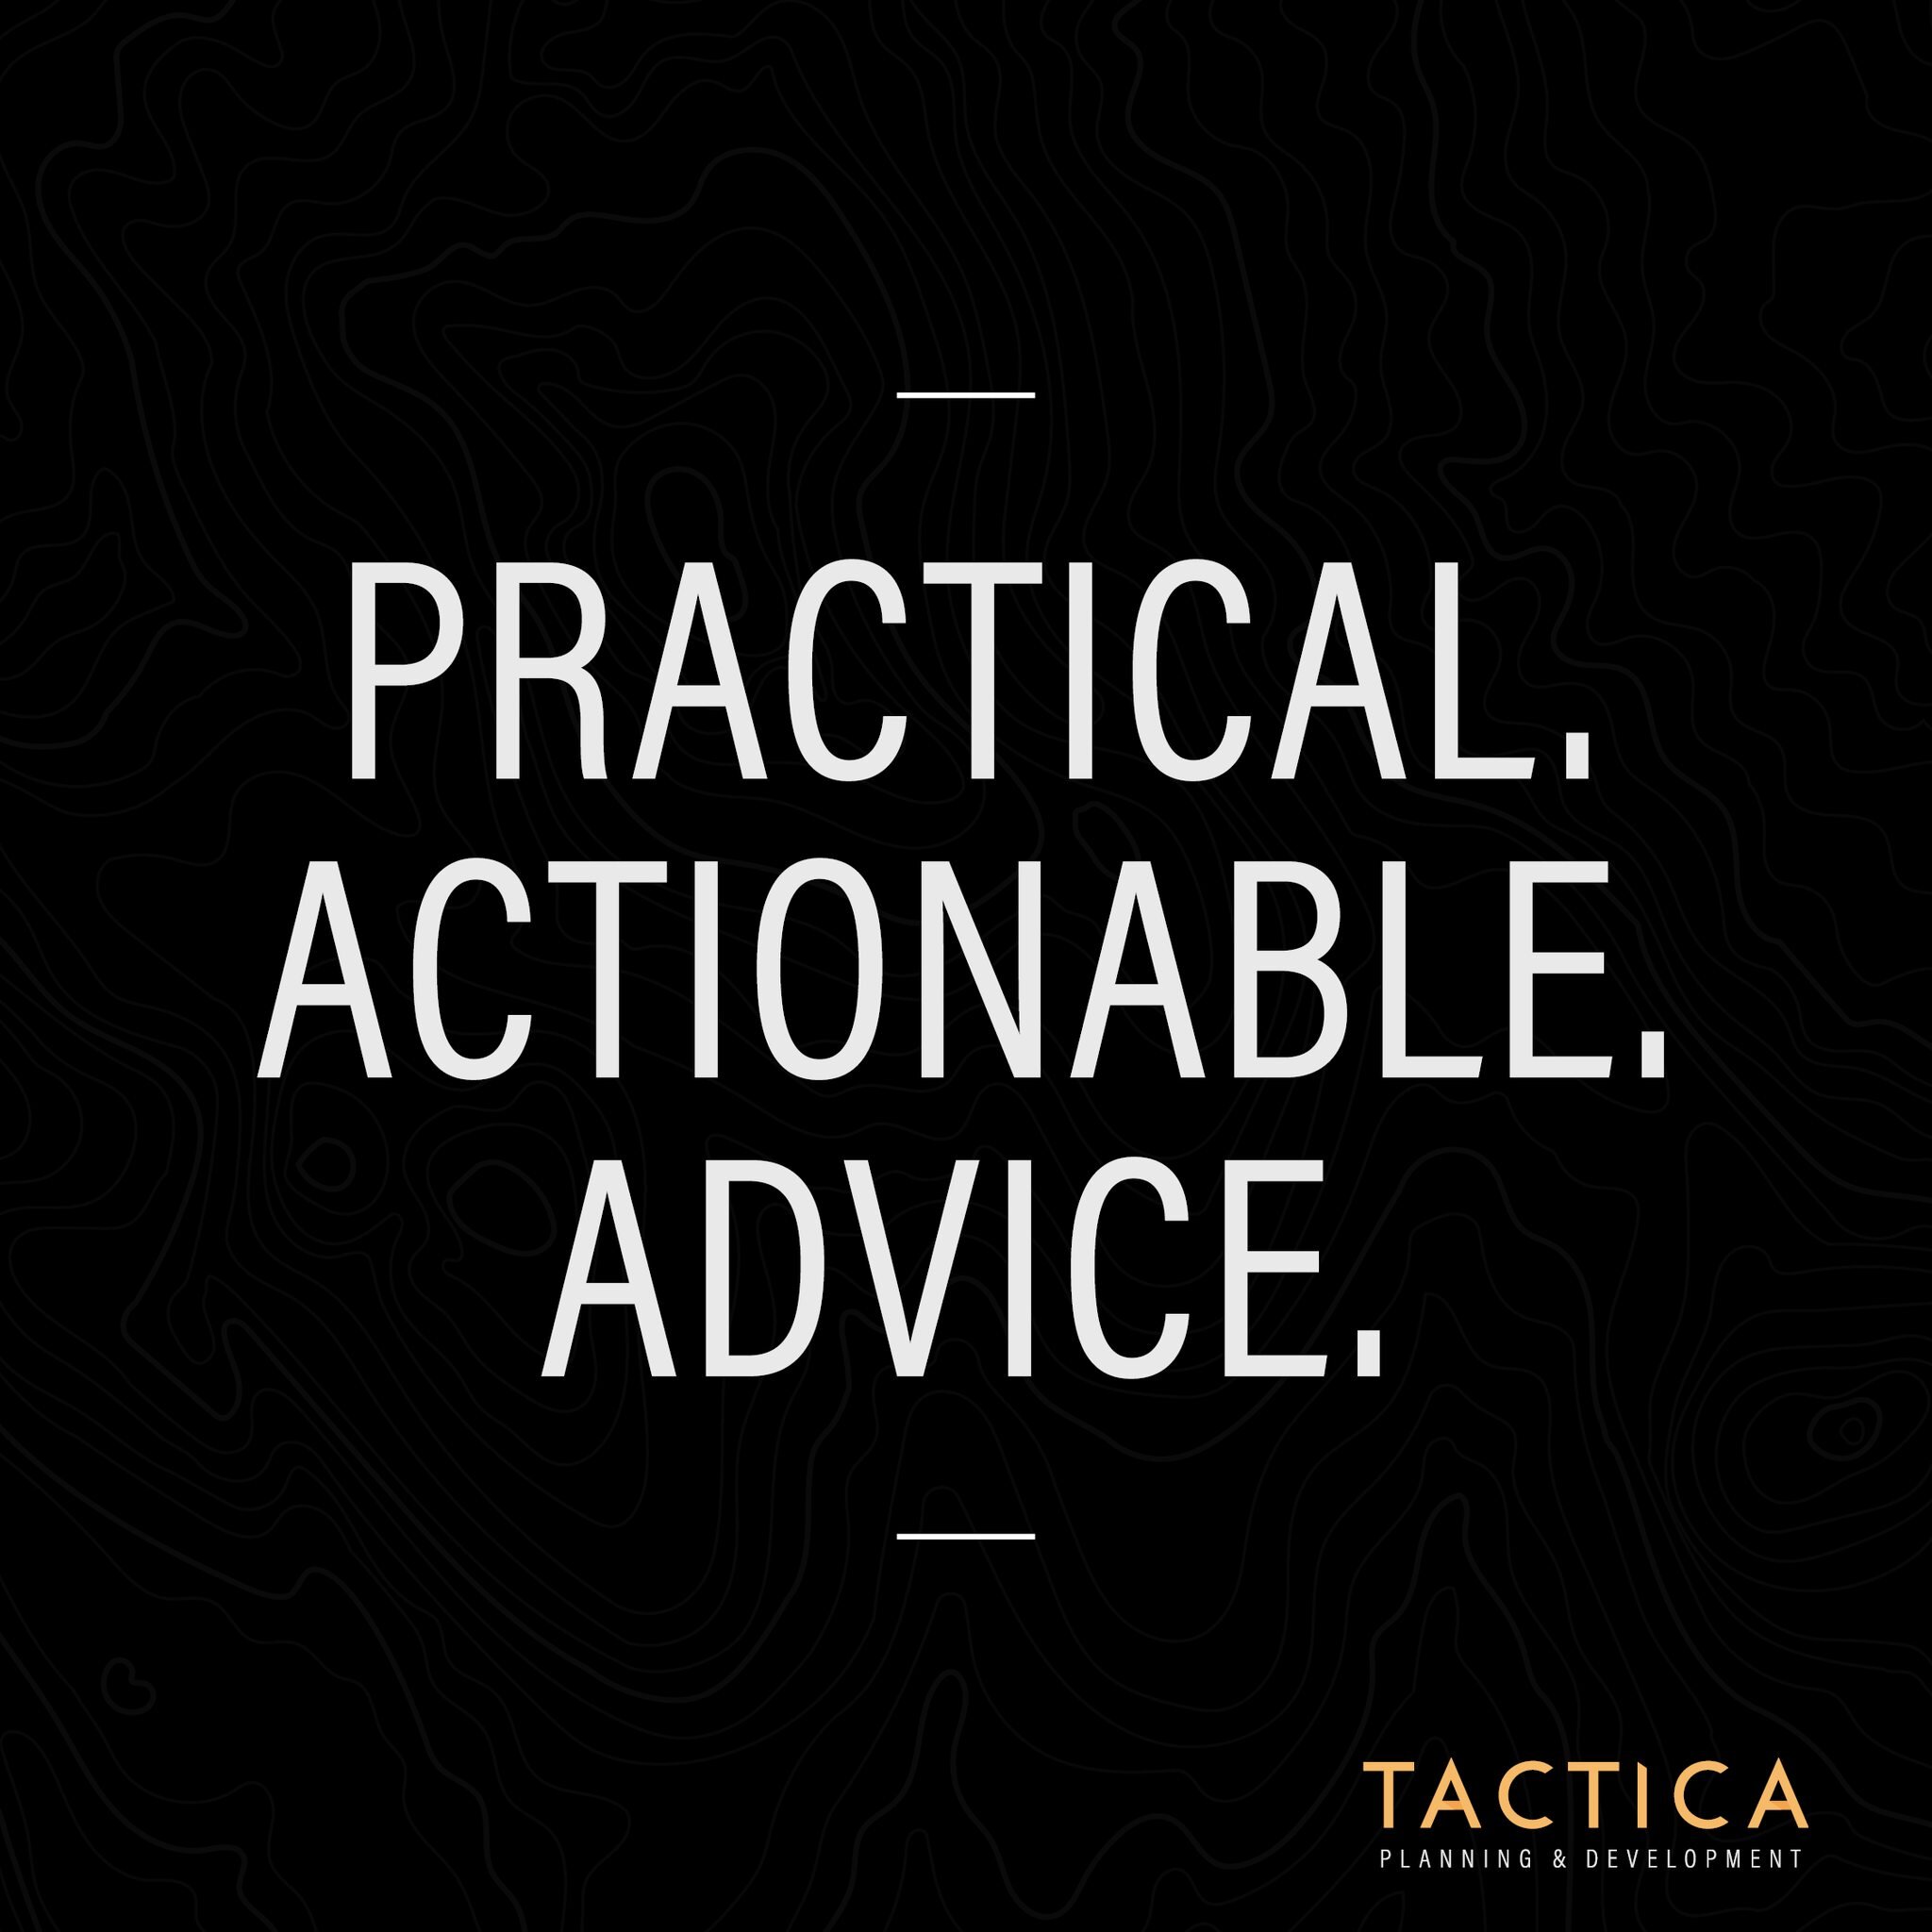 And that&rsquo;s all we have to say about that. Need help? Need answers? Need to cut through jargon? Give Tactica a call to talk through all you need. 
.
#NoBS #tacticaplan #planning #goldcoast #tacticaplanning&amp;development #townplanning #urbanpla